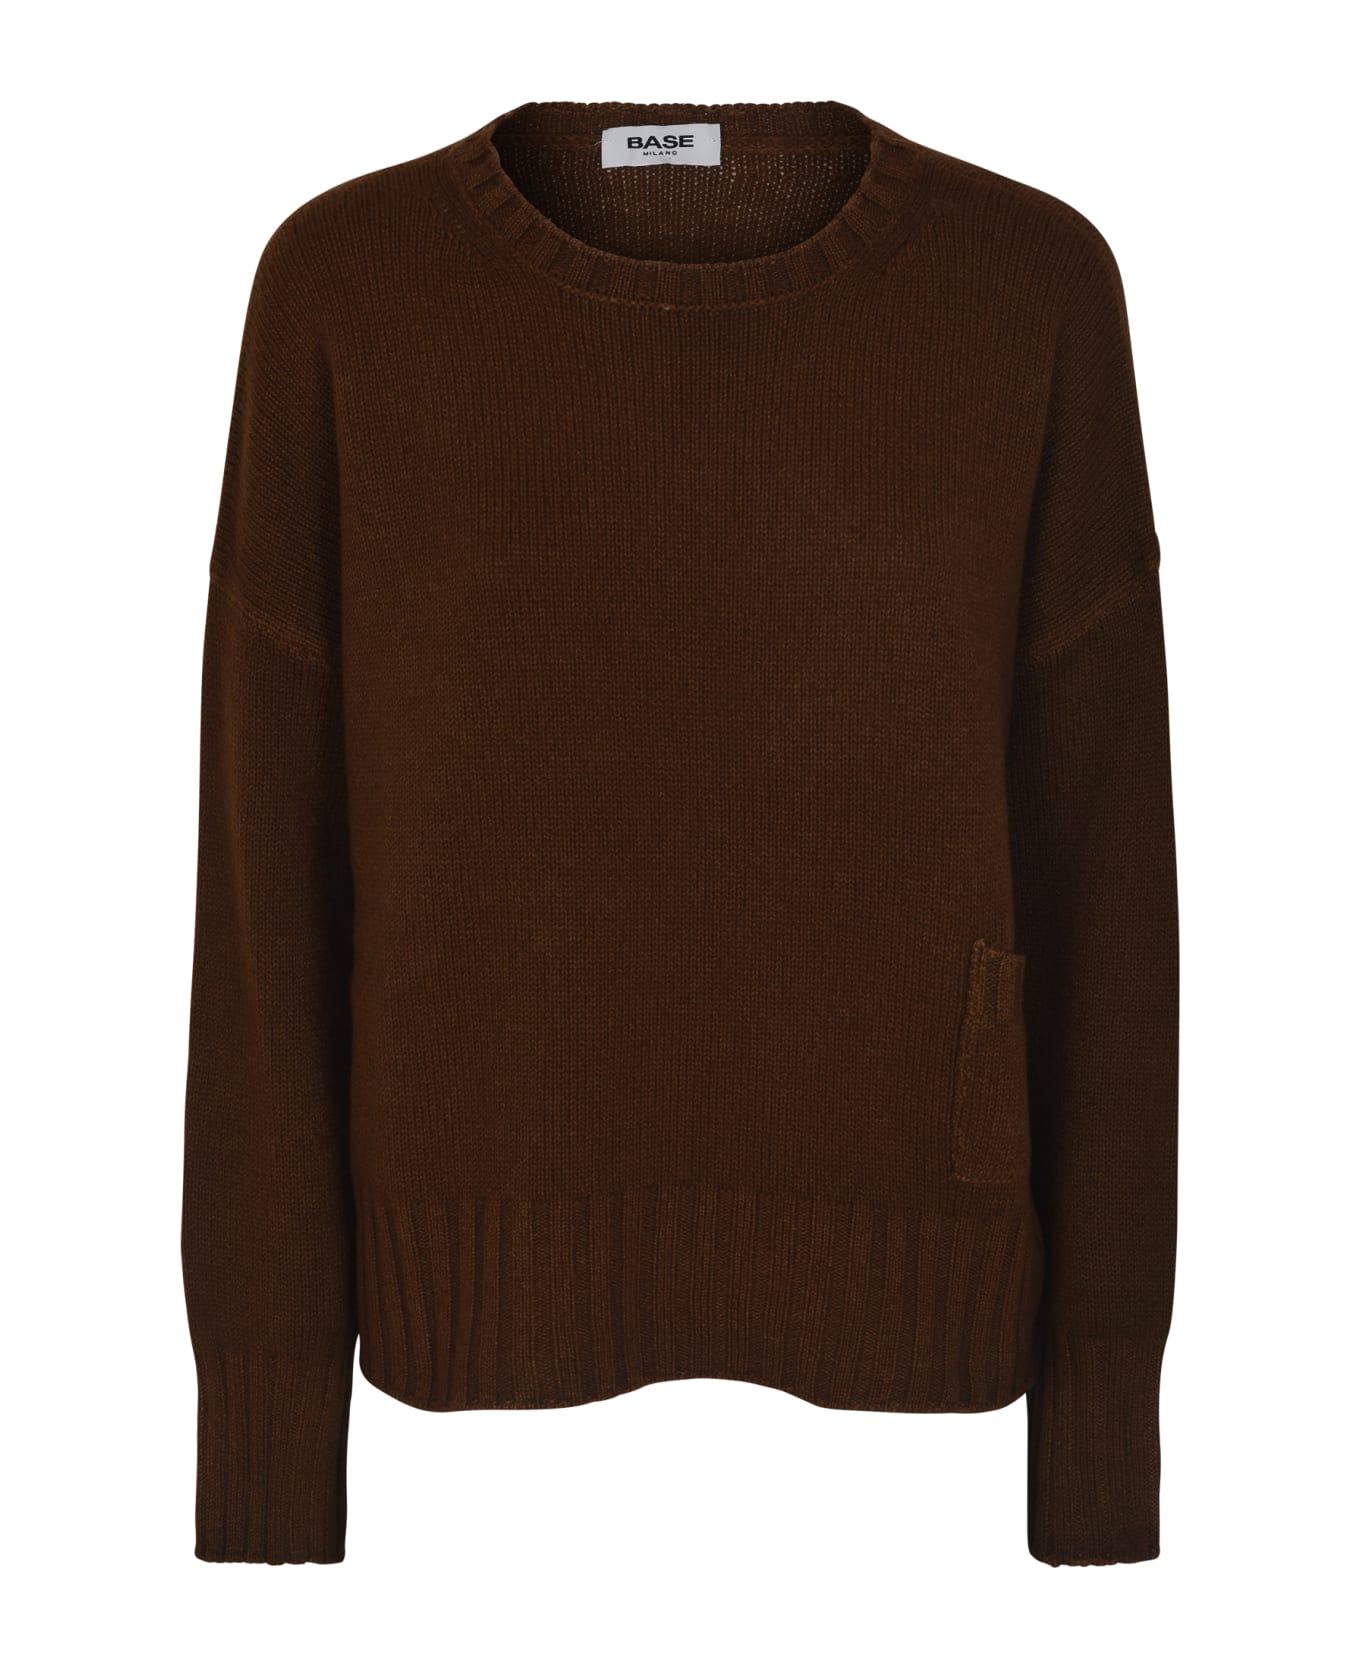 Base Patched Pocket Round Neck Rib Knit Sweater - Coffee